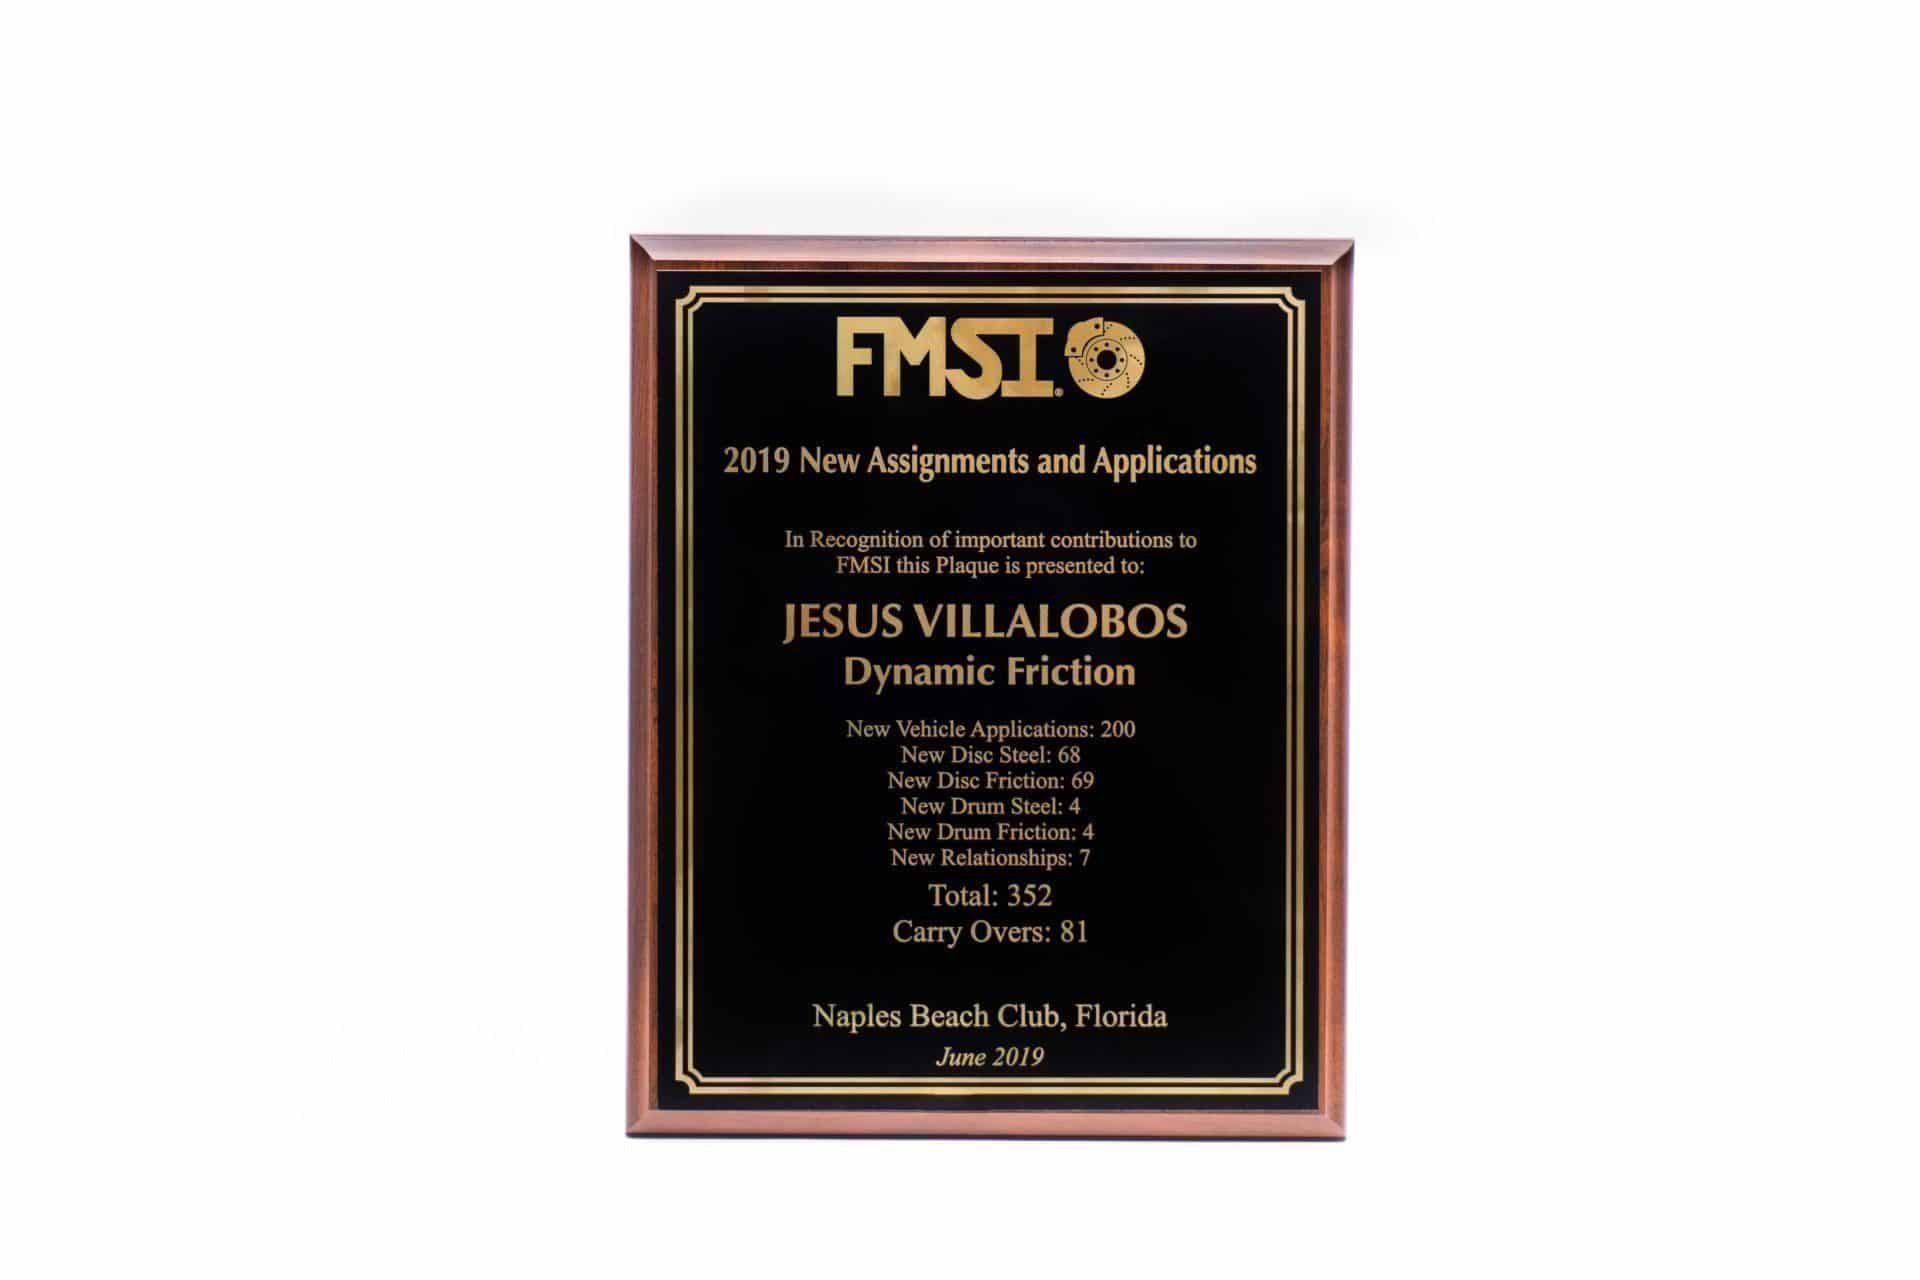 Dynamic Friction Company Honored by FMSI for the Third Consecutive Year